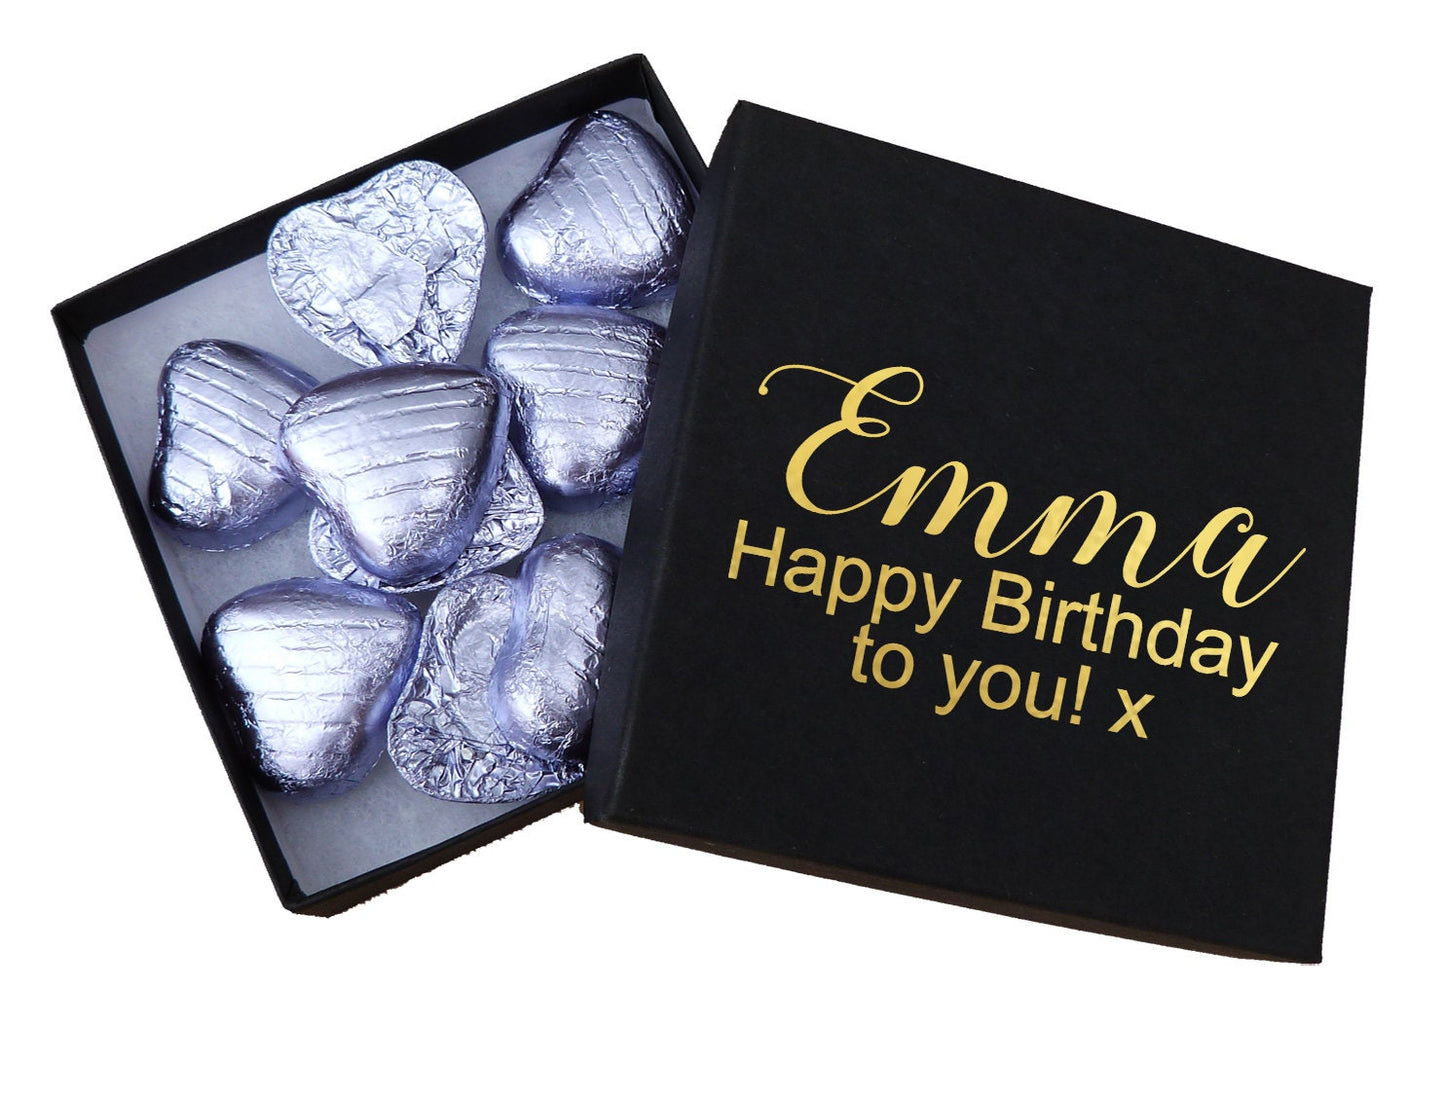 Personalised chocolates gift box gold foil valentines day name message love heart sweets gift